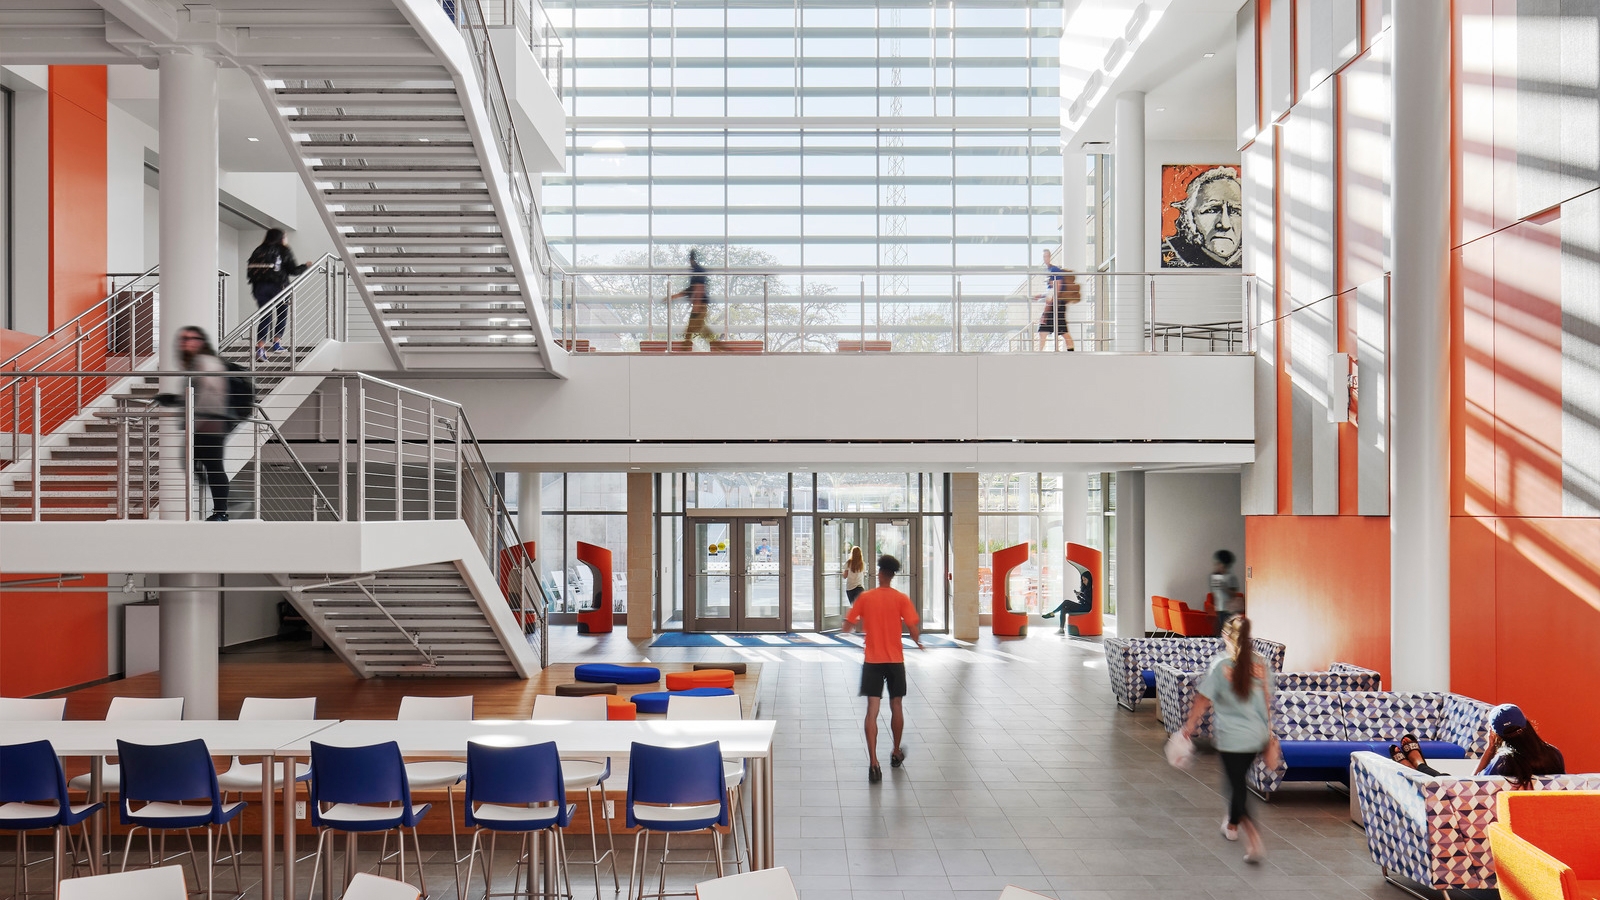 University student center with bright light shining into the room through expansive windows. 